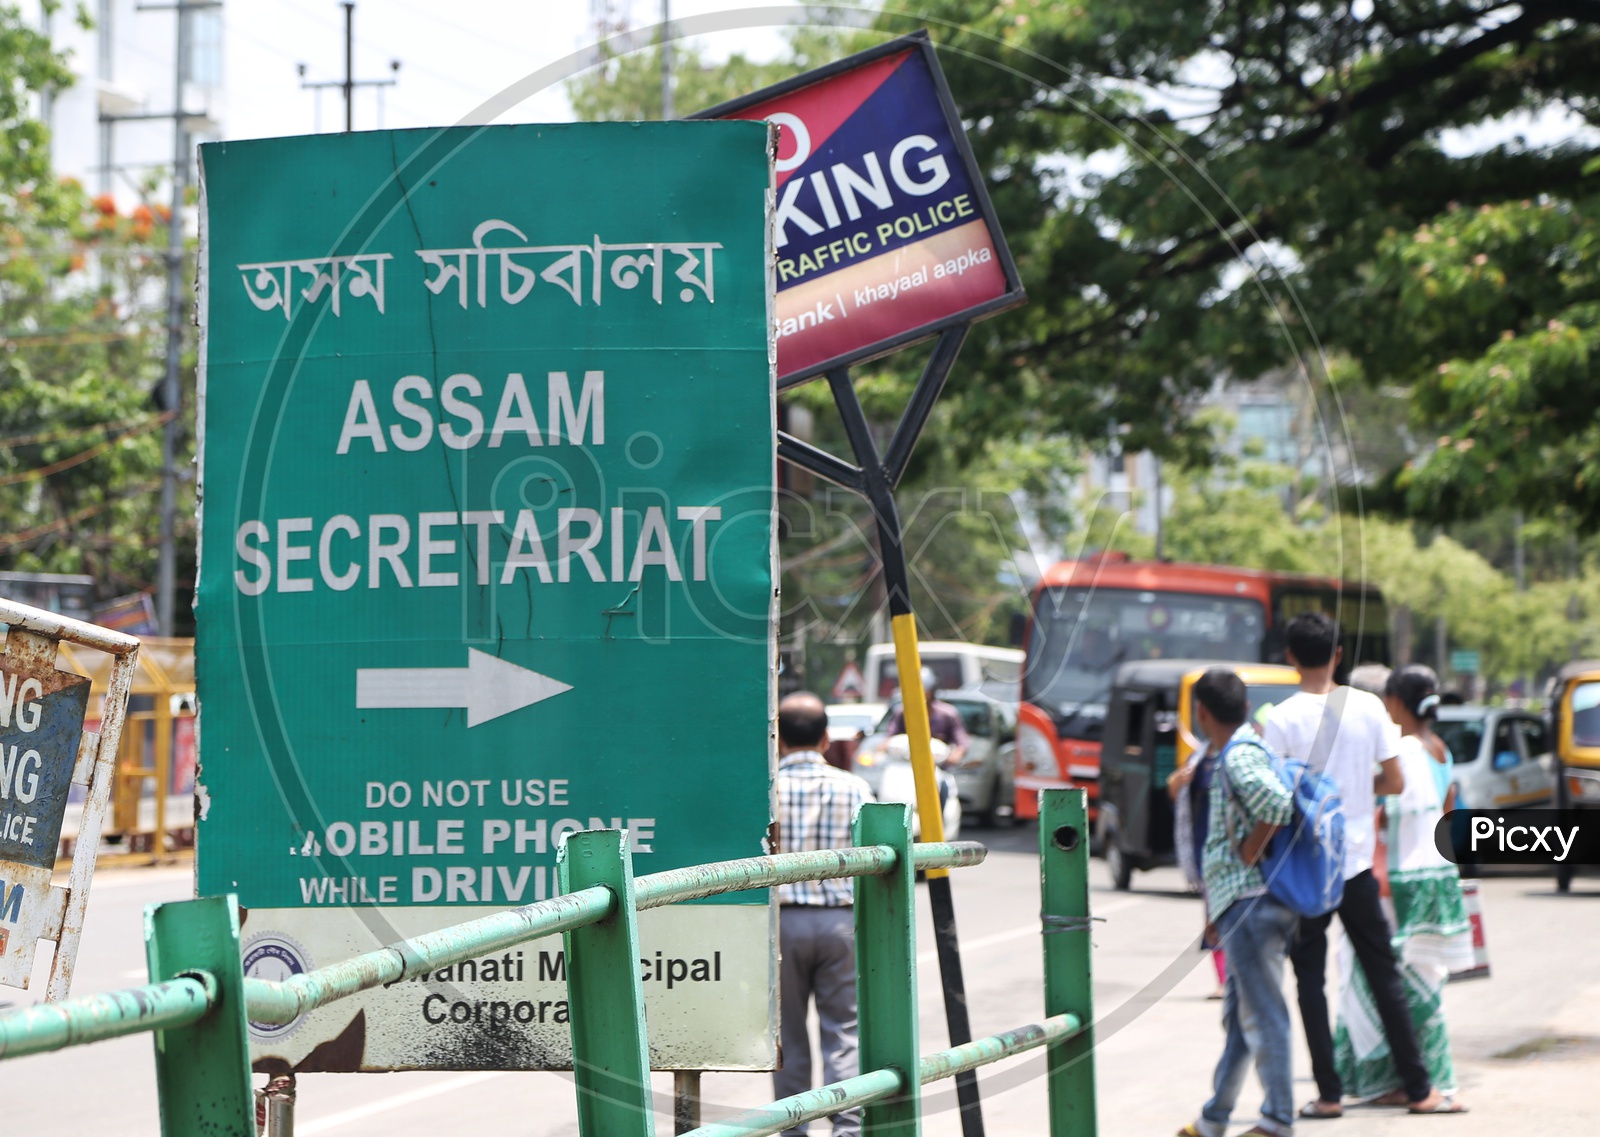 Sign Board Of  Assam Secretariat With Directions